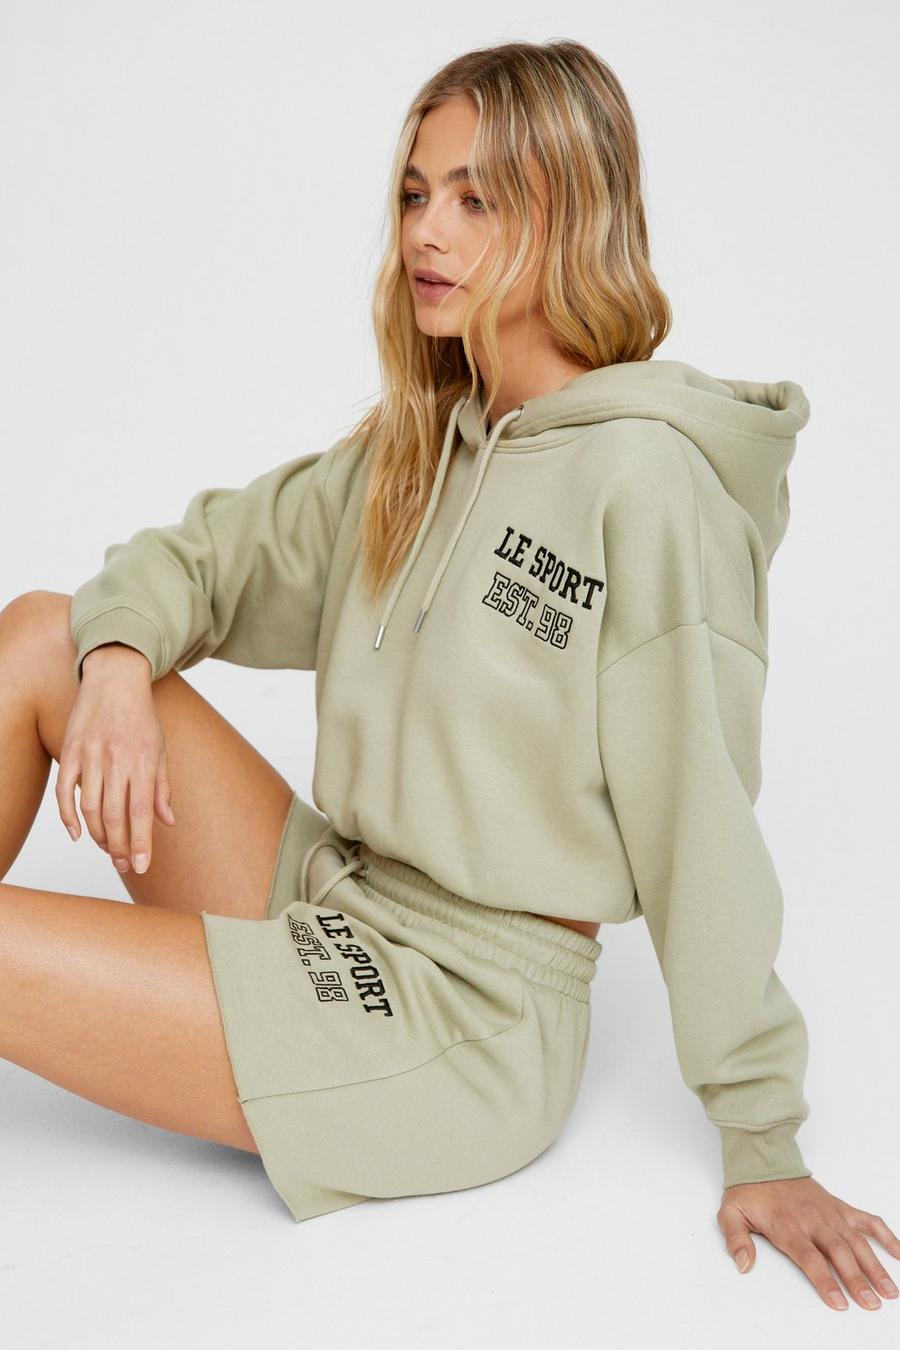 Le Sport Embroidered Hoodie